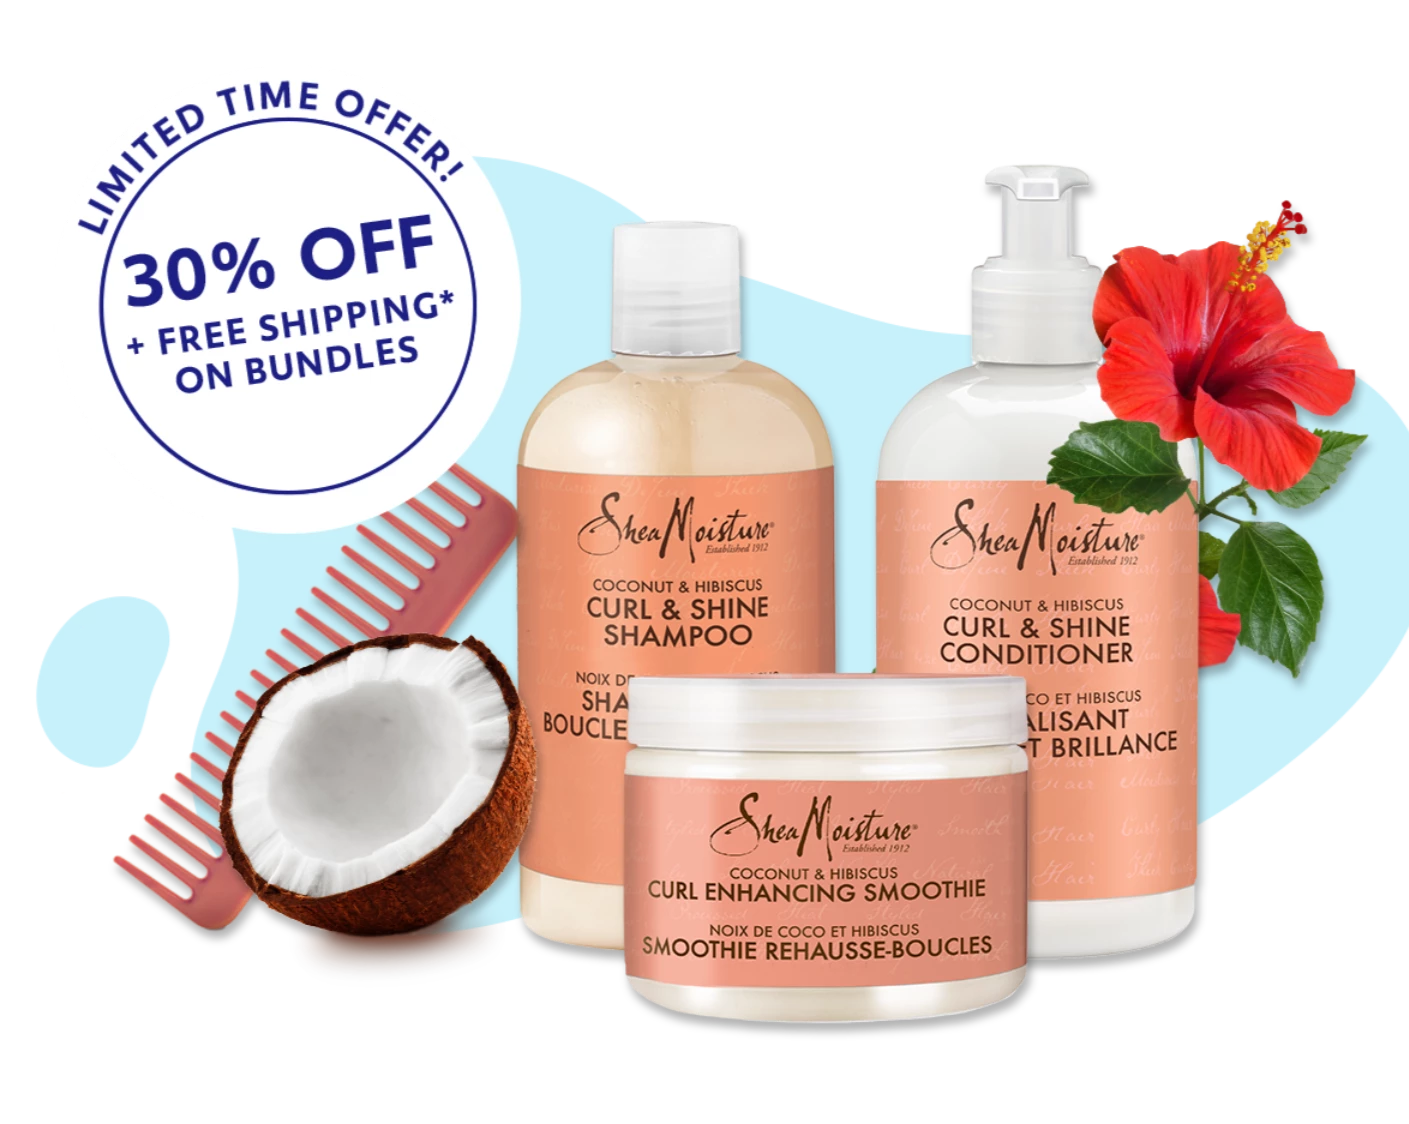 Showing the 3 included products alongside a call to action "Limited time offer: 30% off plus free shipping (for orders in Ontario) on bundles!"